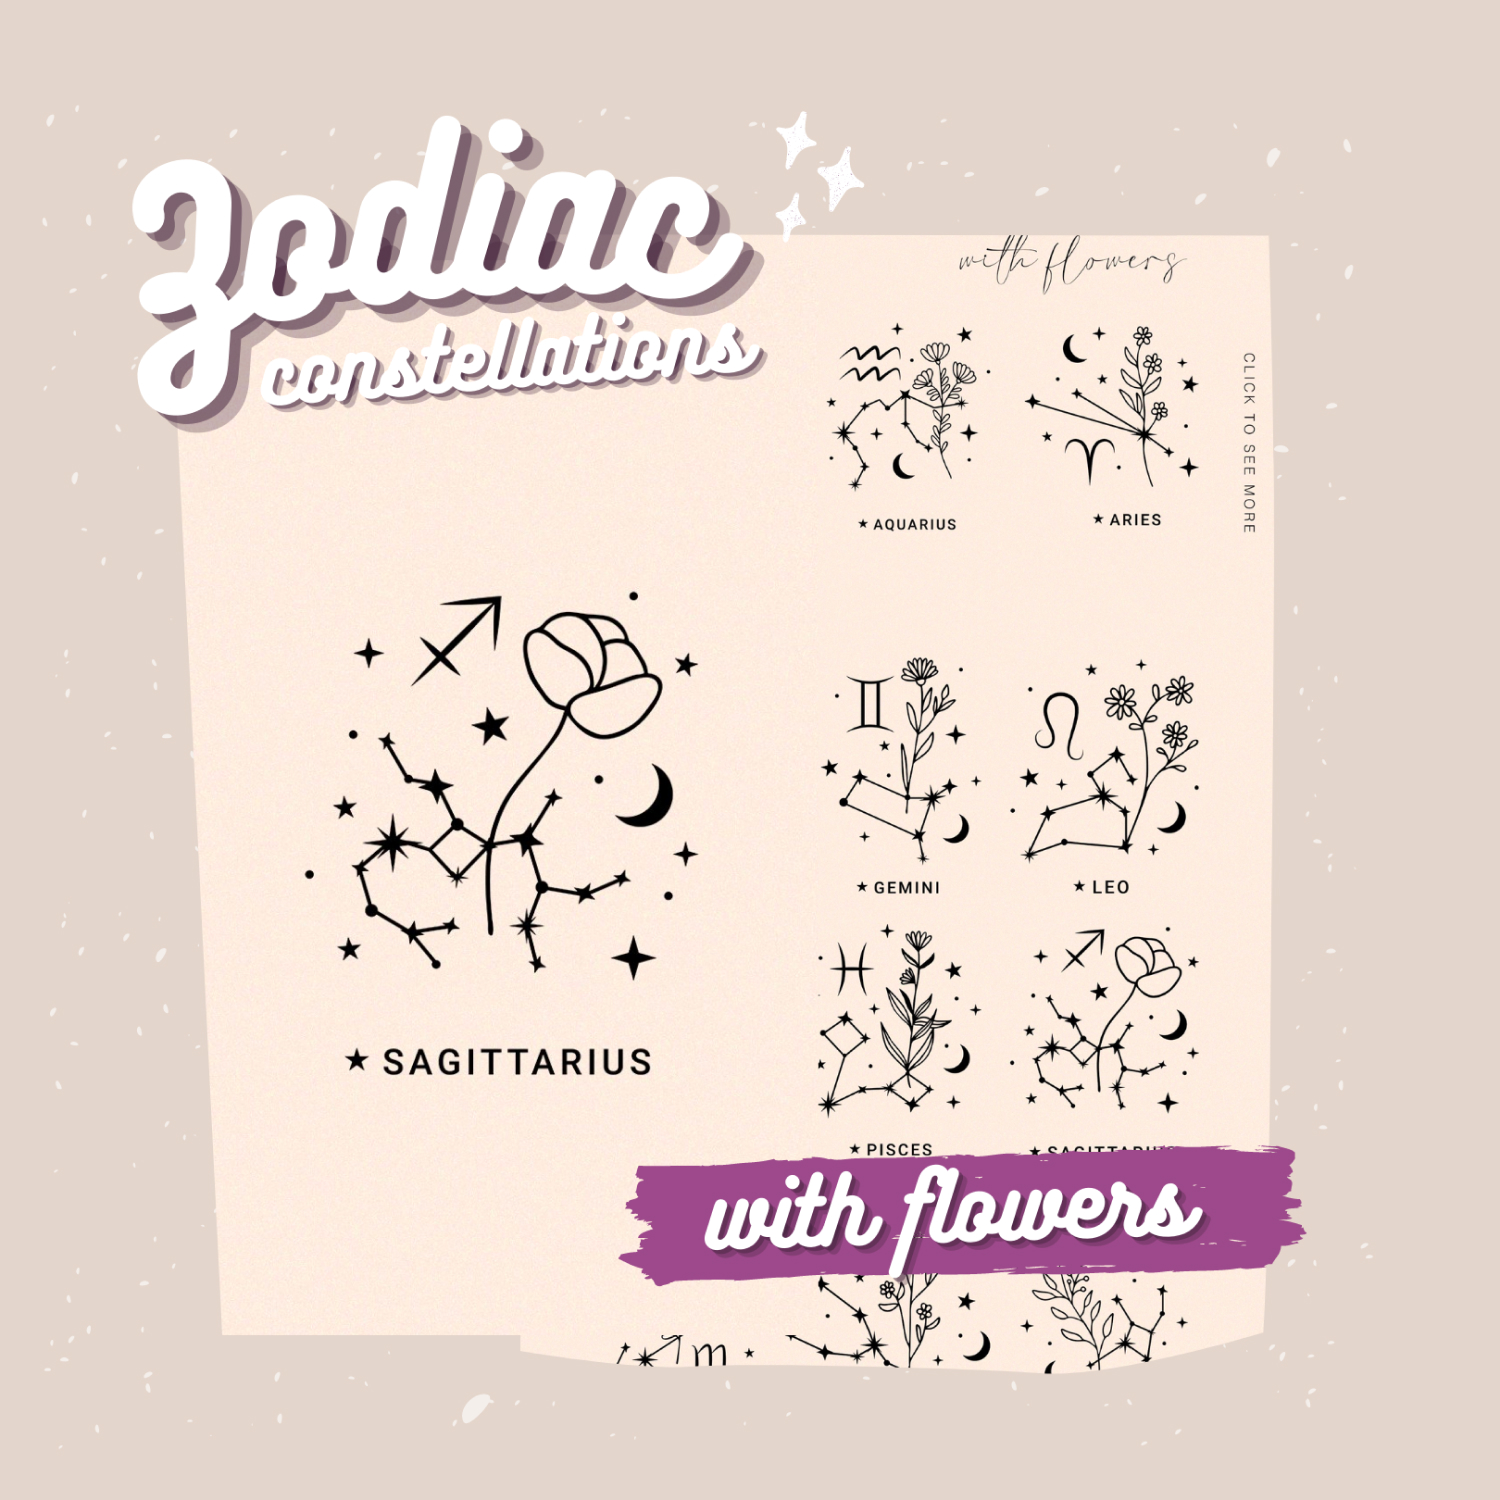 Preview zodiac constellations with flowers.